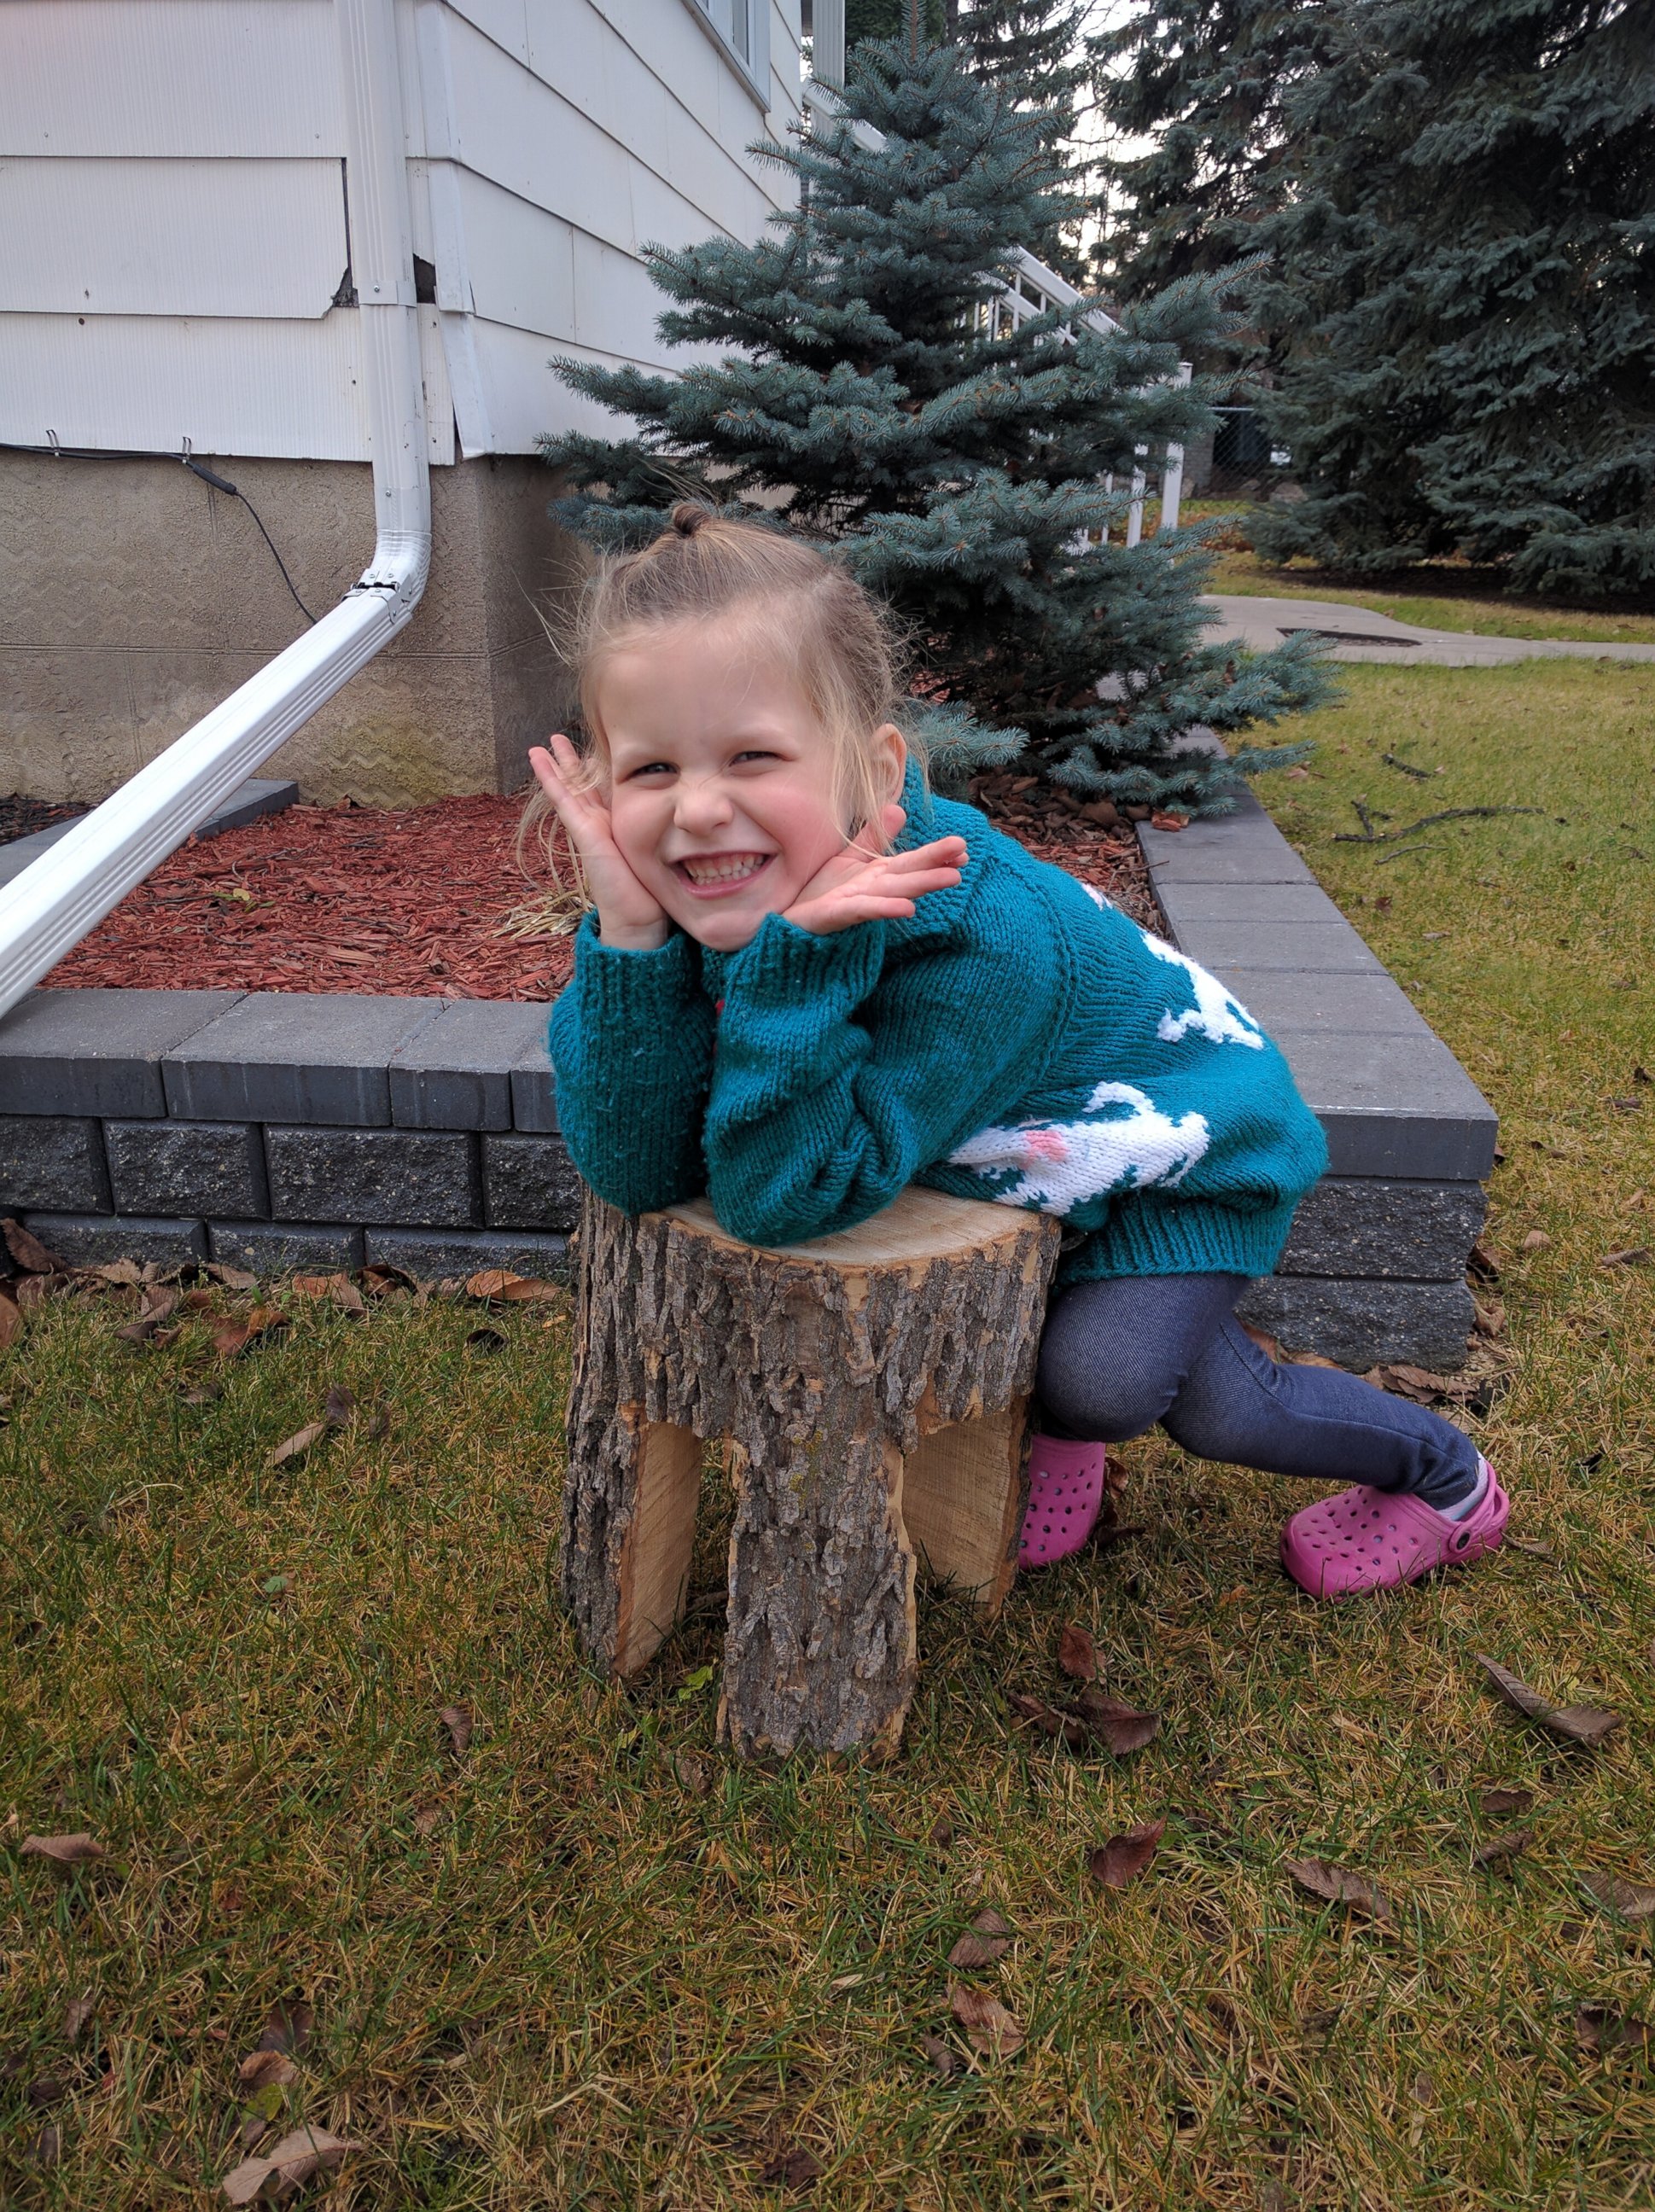 PHOTO: Shae Culley, 4, got her name carved out of the stump and a small stool as a special surprise after her beloved tree was cut down.